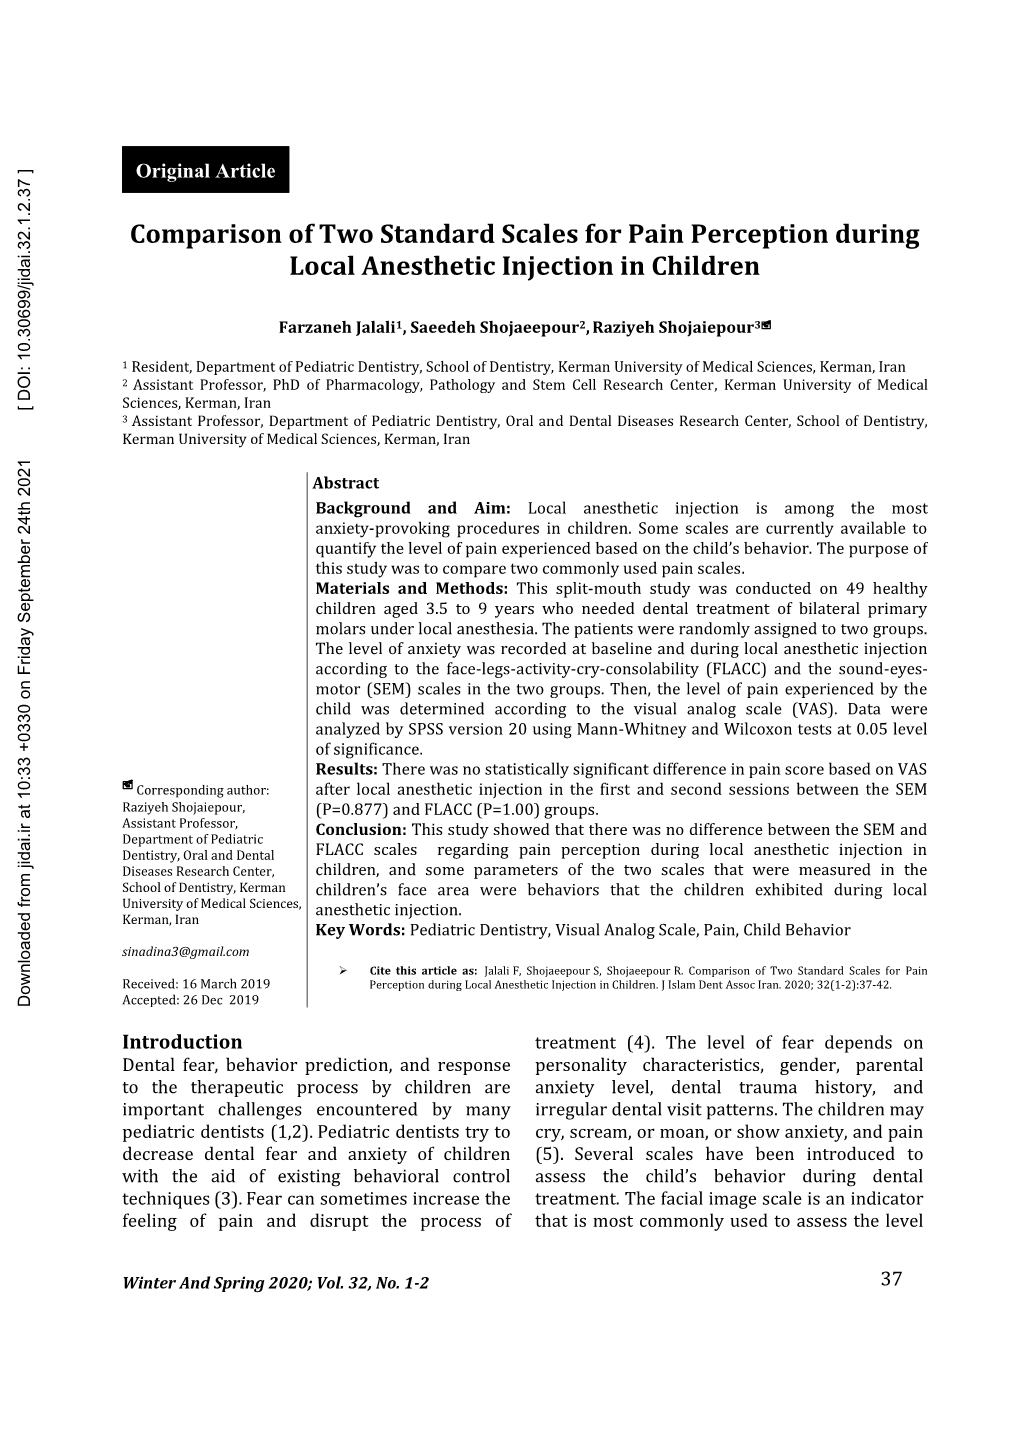 Comparison of Two Standard Scales for Pain Perception During Local Anesthetic Injection in Children